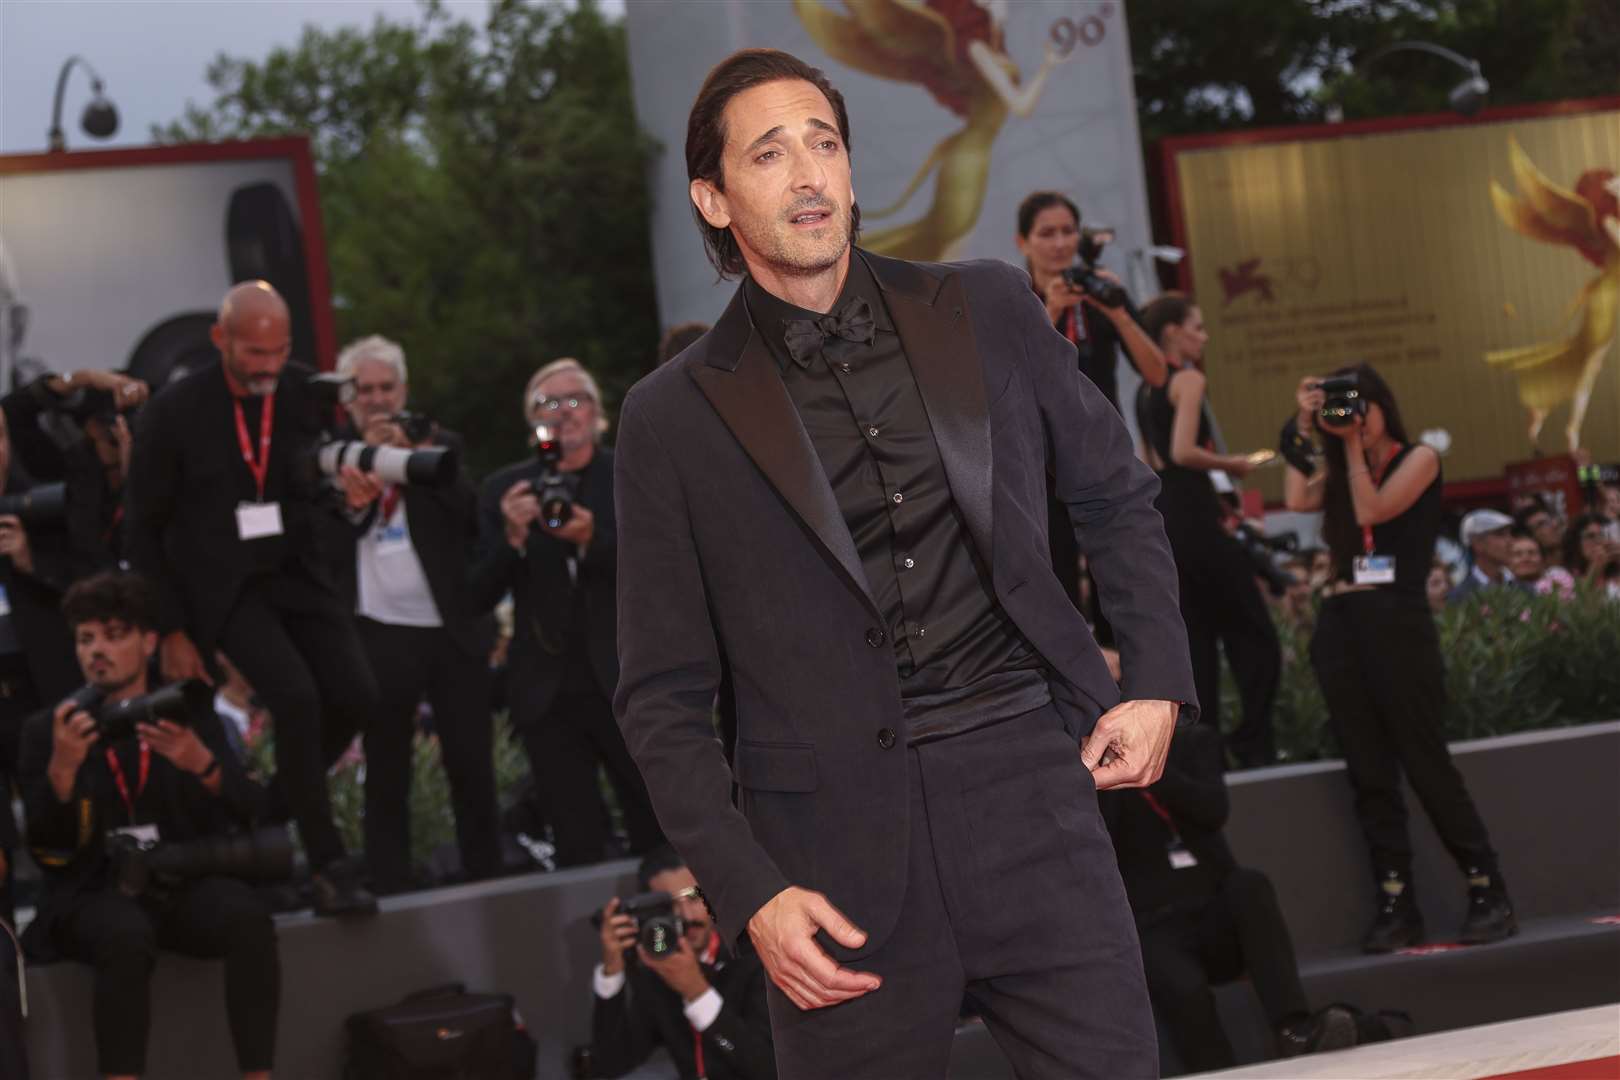 Adrien Brody poses for photographers upon arrival at the premiere of the film Blonde (Joel C Ryan/Invision/AP)